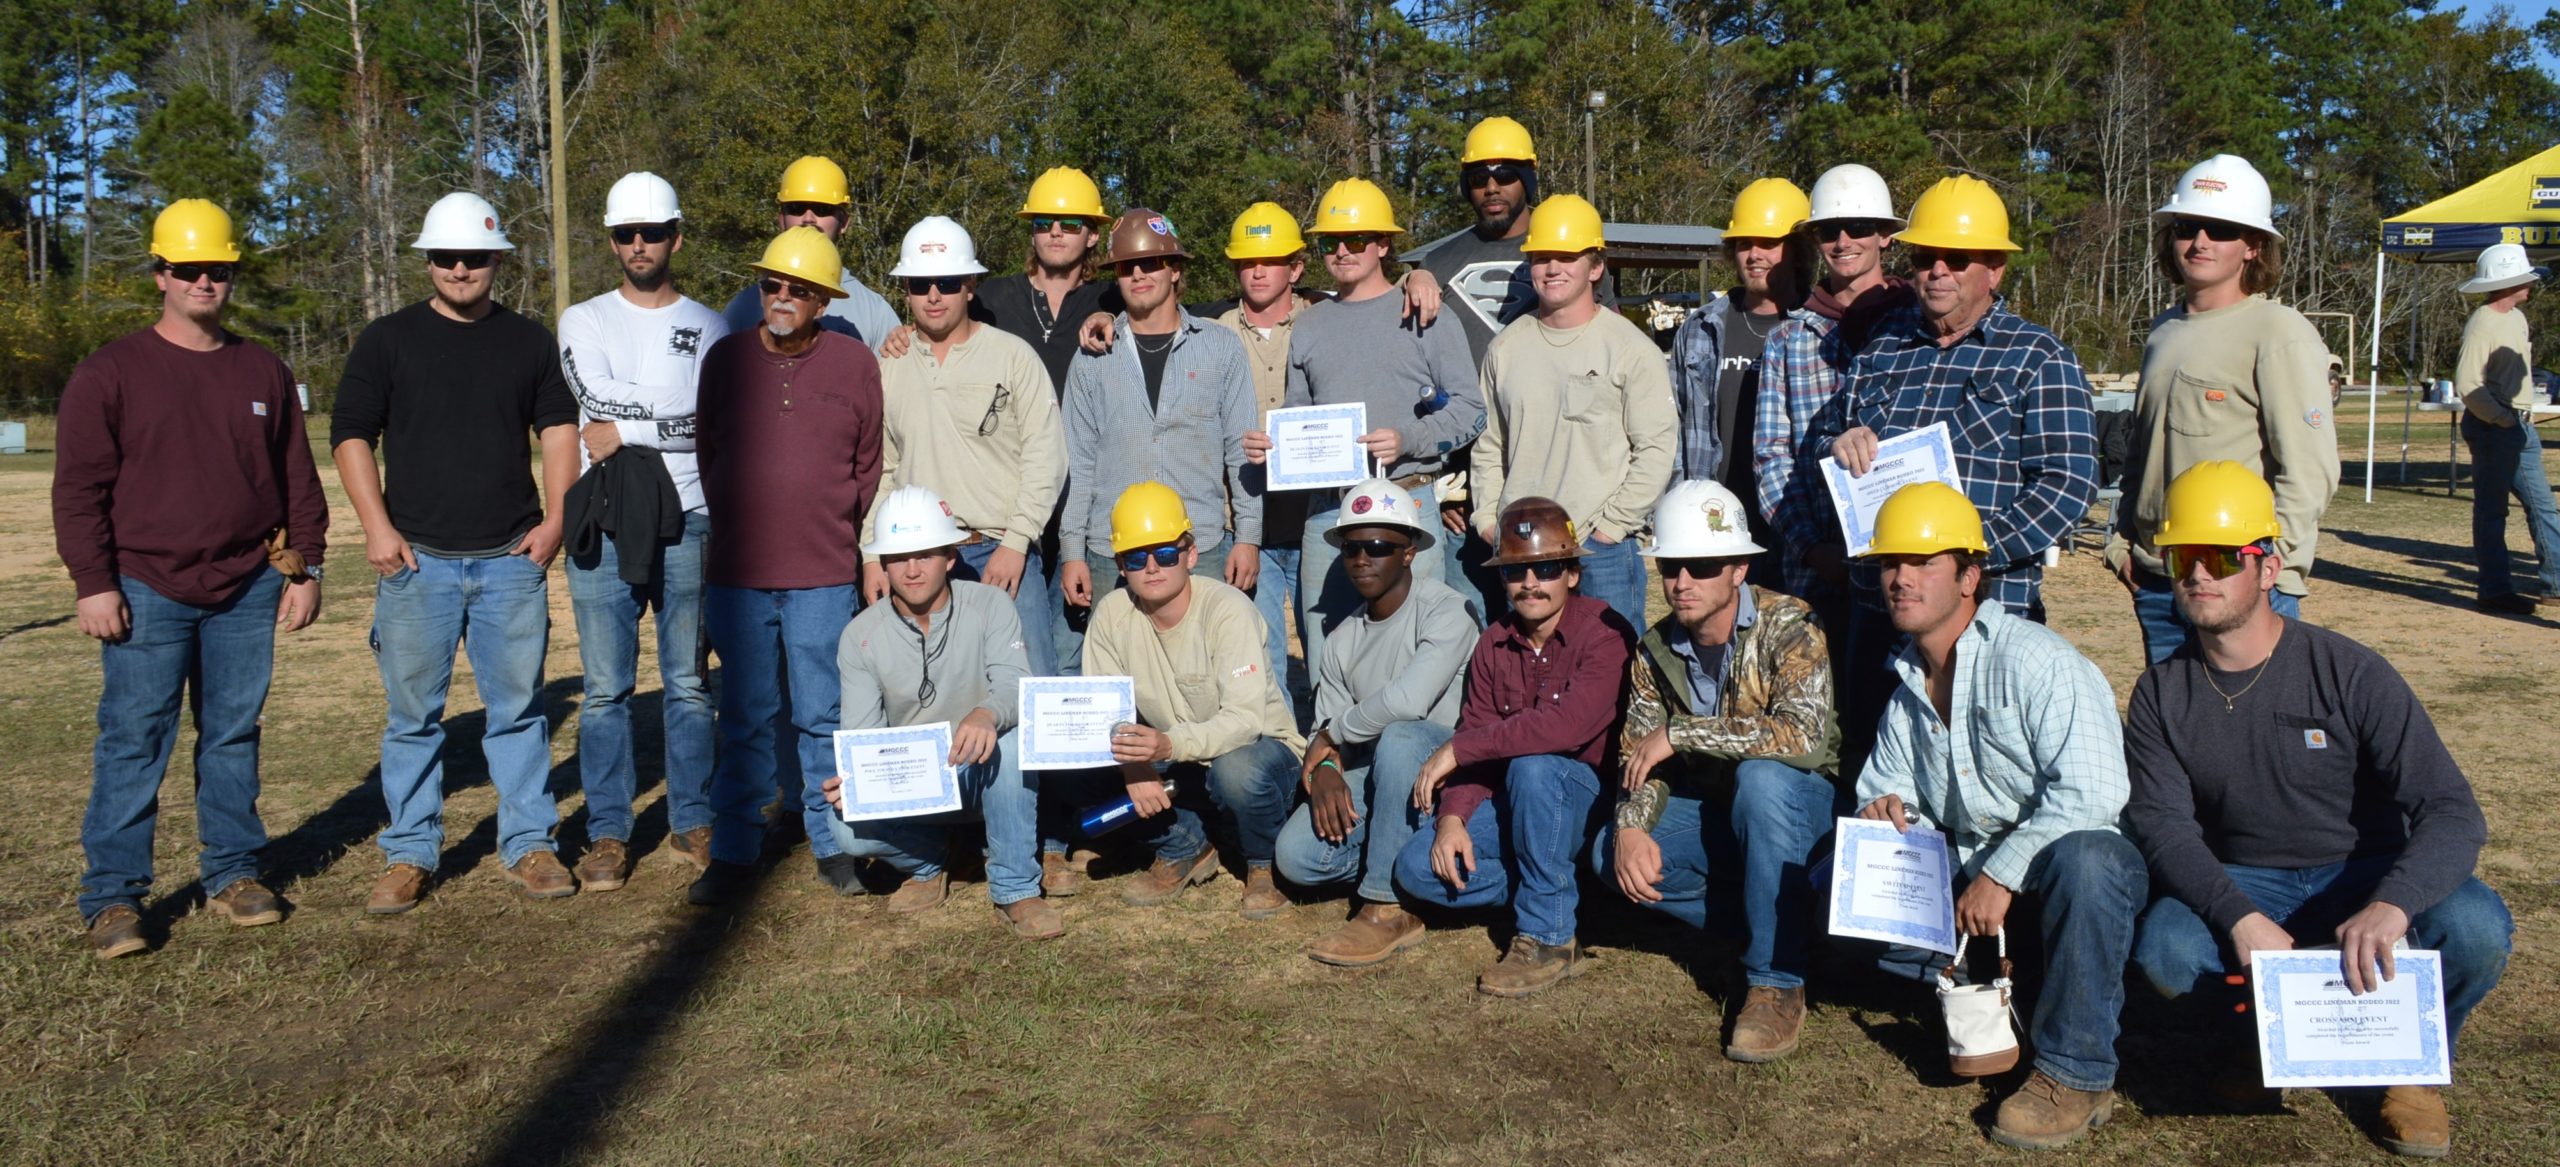 Participants in lineworker rodeo